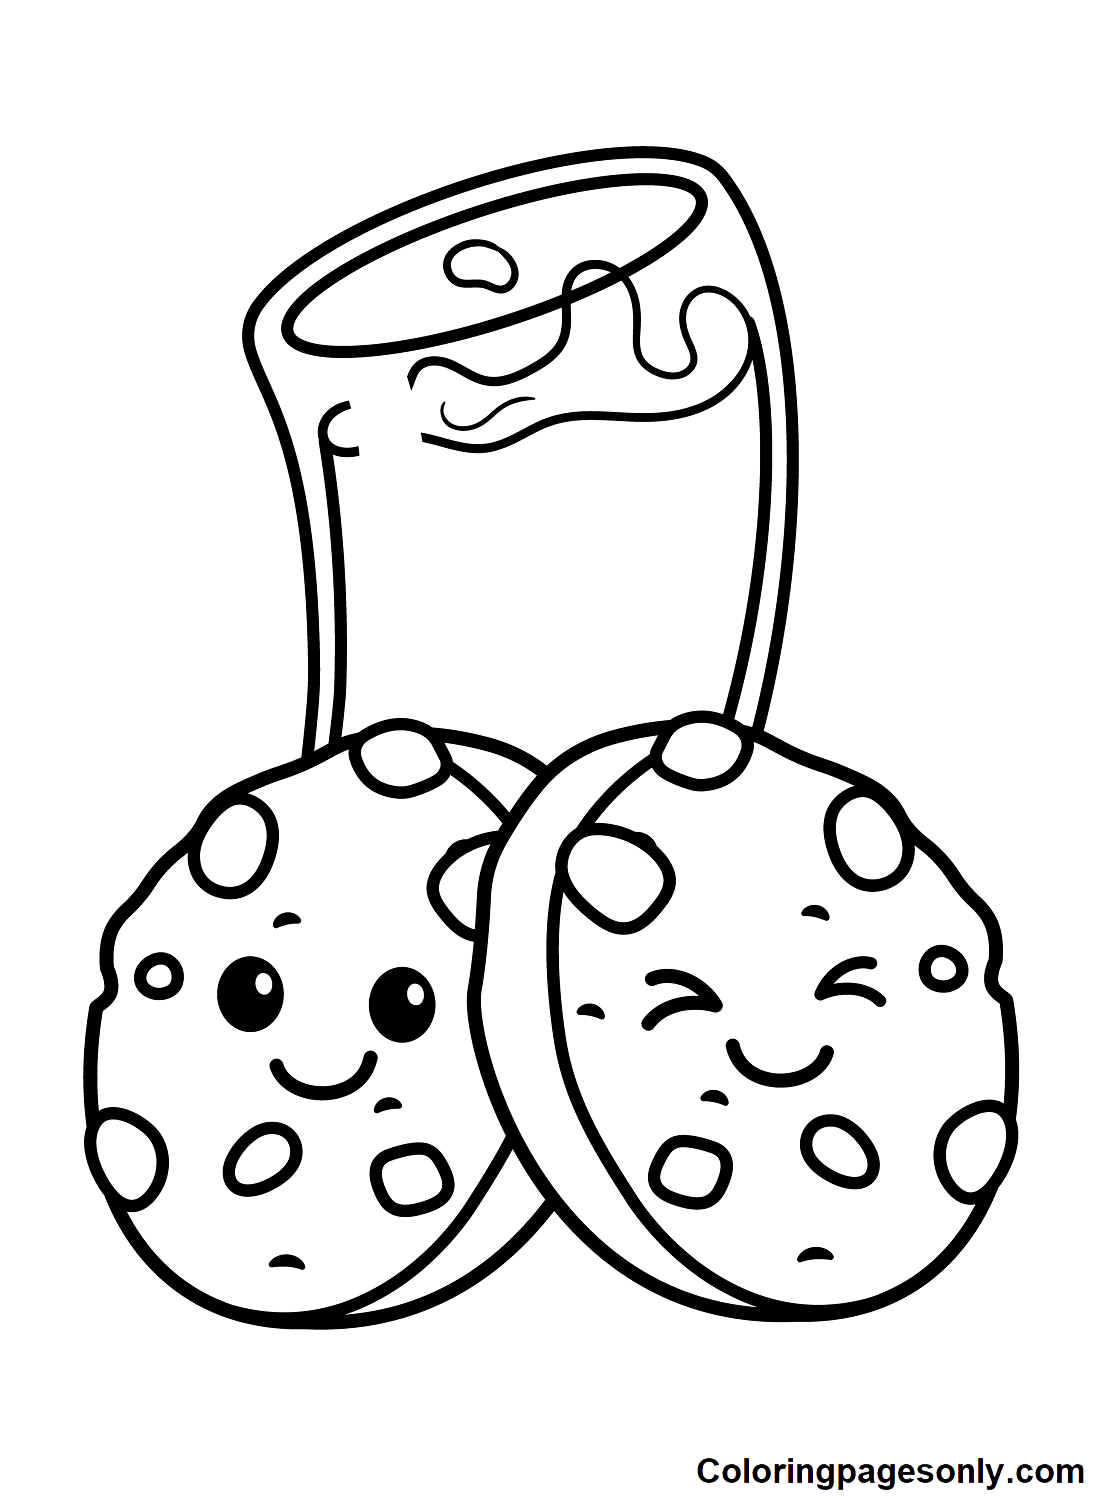 Cookie coloring pages printable for free download